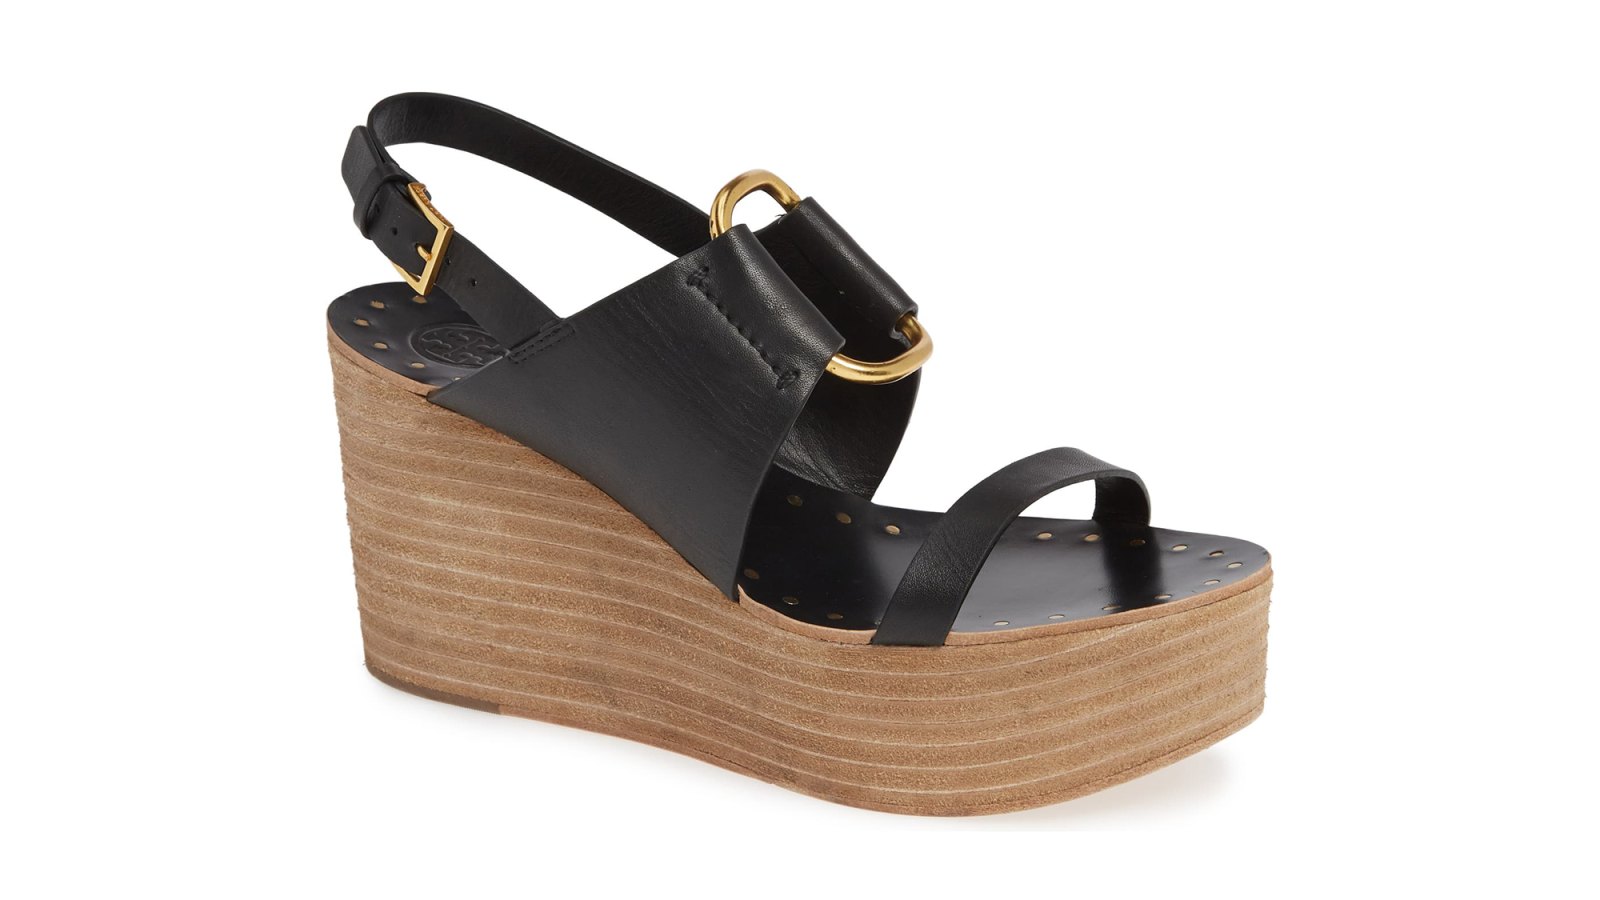 Drop Everything! These Stunning Tory Burch Sandals Are 50% Off!